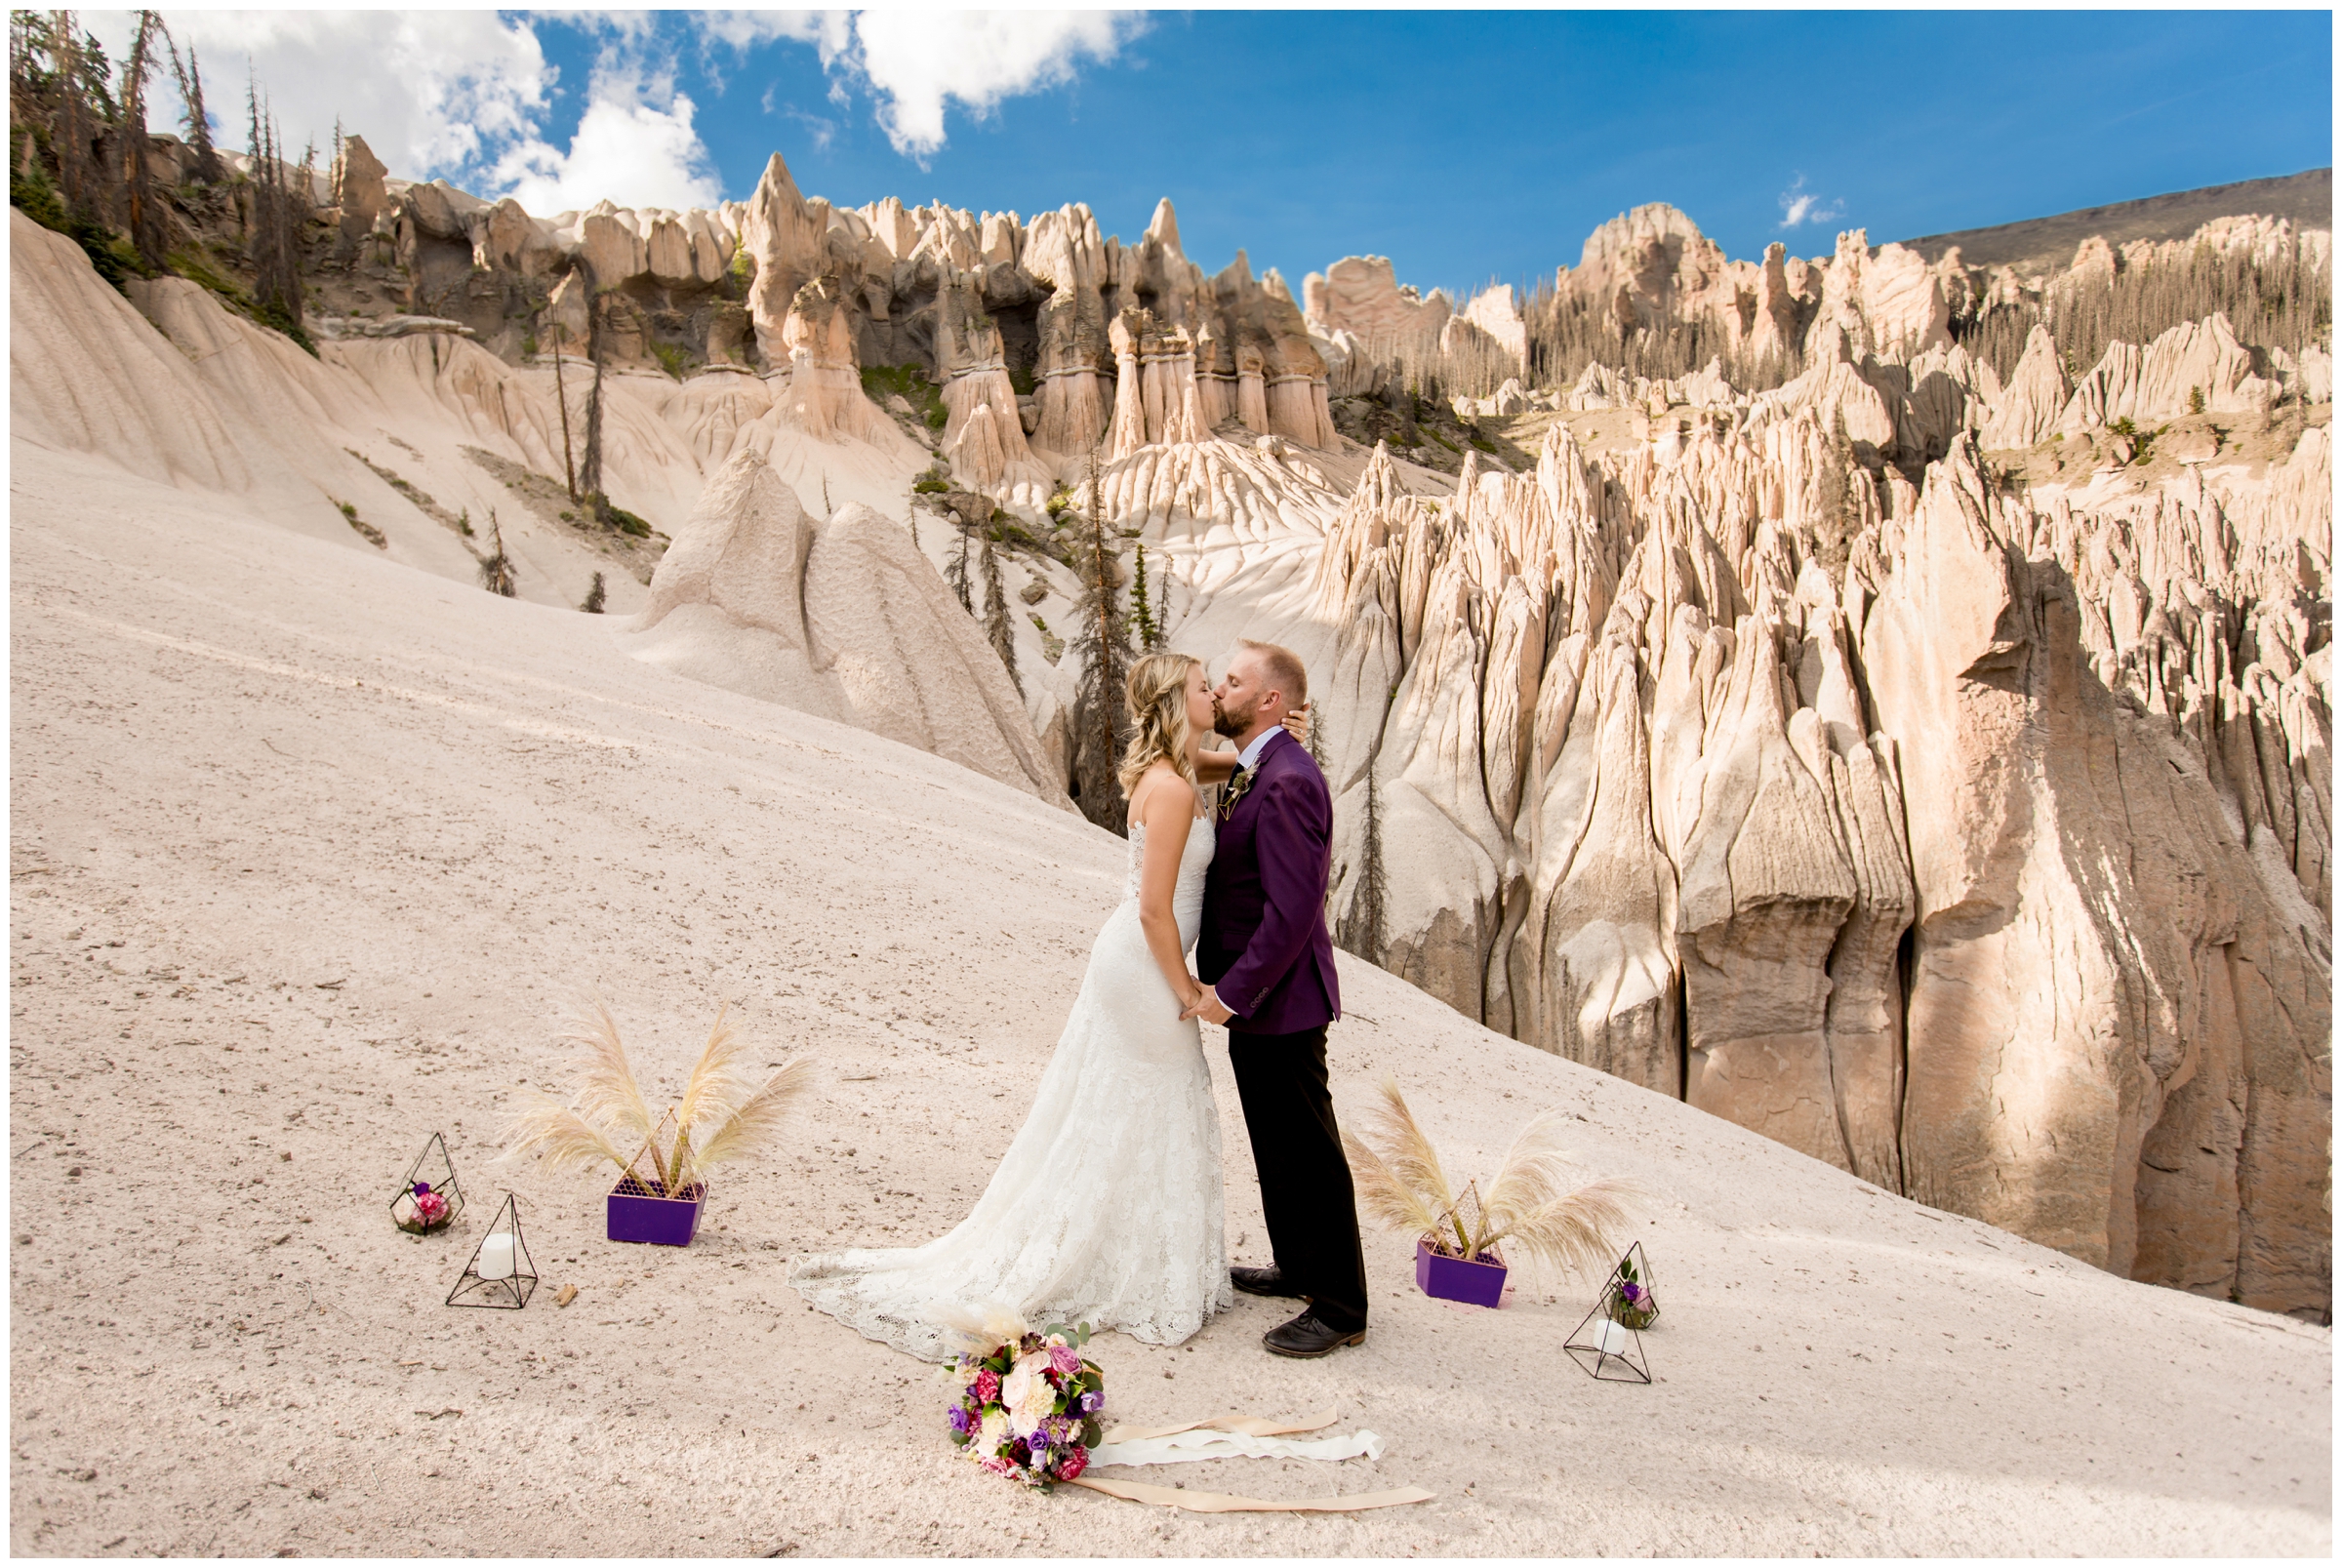 Colorado adventure elopement at Wheeler Geologic Area in Creede, CO. Waterfall intimate wedding inspiration by photographer Plum Pretty Photography.